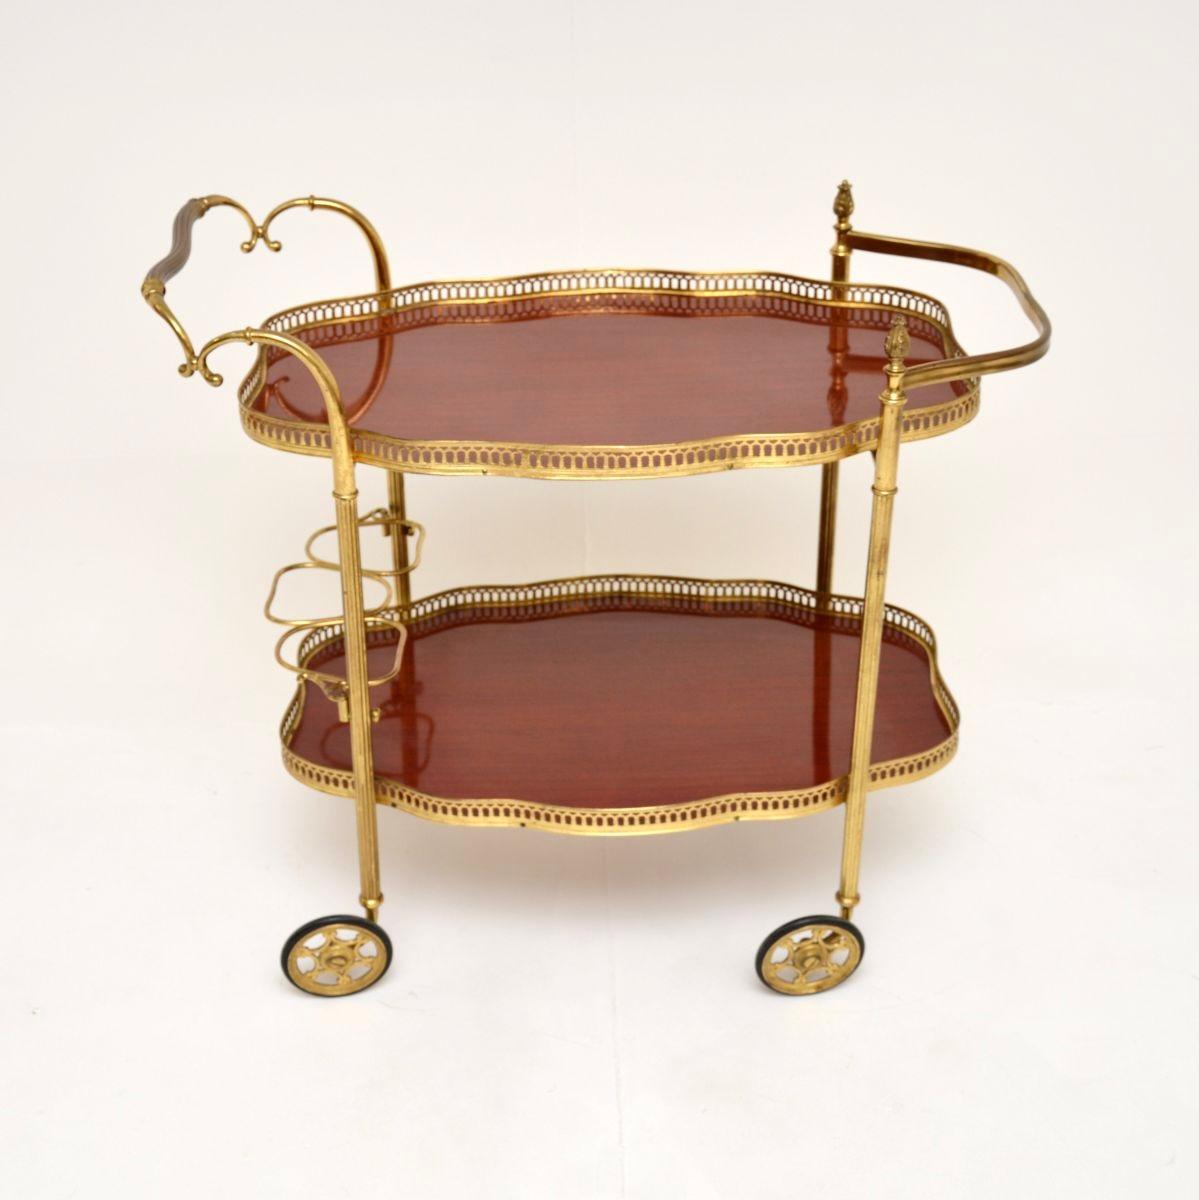 A stylish and very well made vintage French drinks trolley, dating from the 1950’s.

It is beautifully constructed and designed, with a high quality brass frame and lacquered wooden surfaces. The top tray lifts of to be used as a serving tray, the